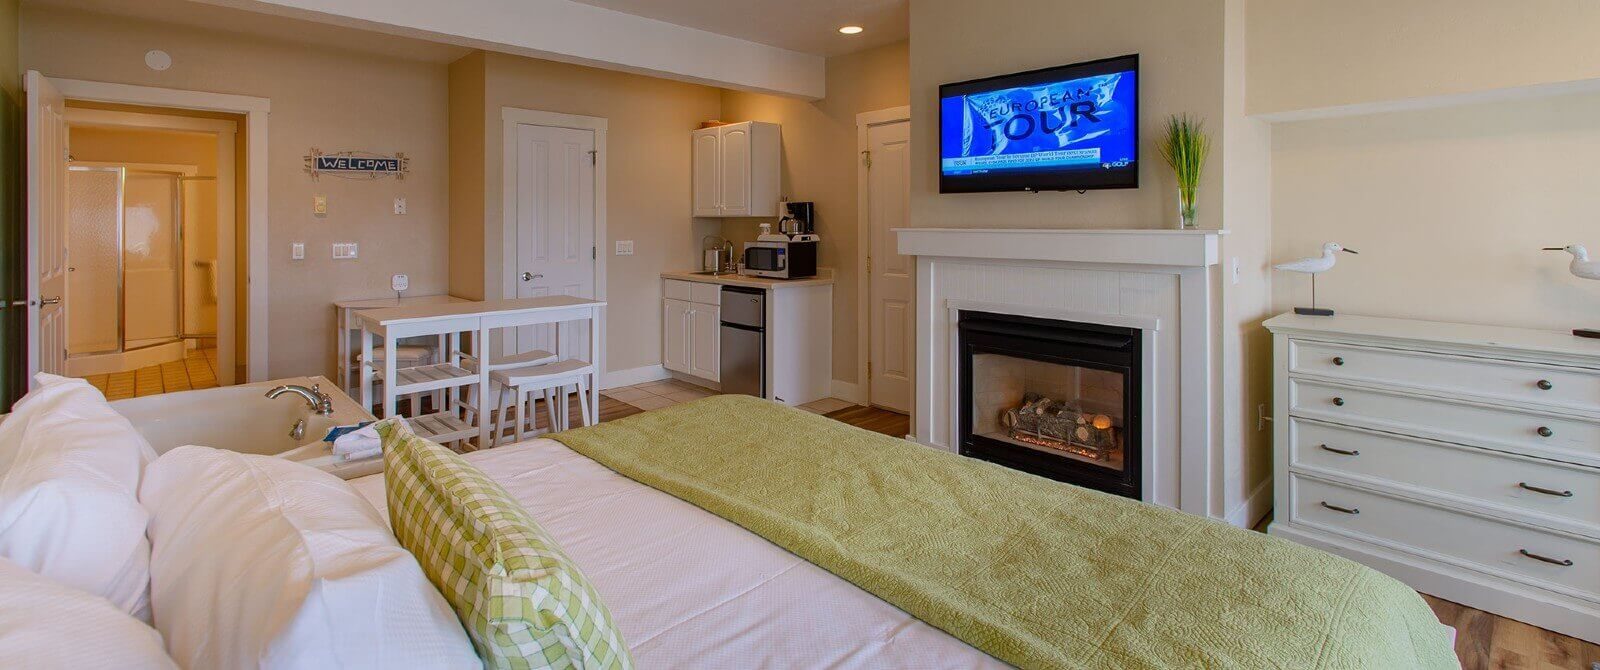 Bedroom with king bed, soaker tub, bistro table with stools, kitchenette and gas fireplace with flat screen TV